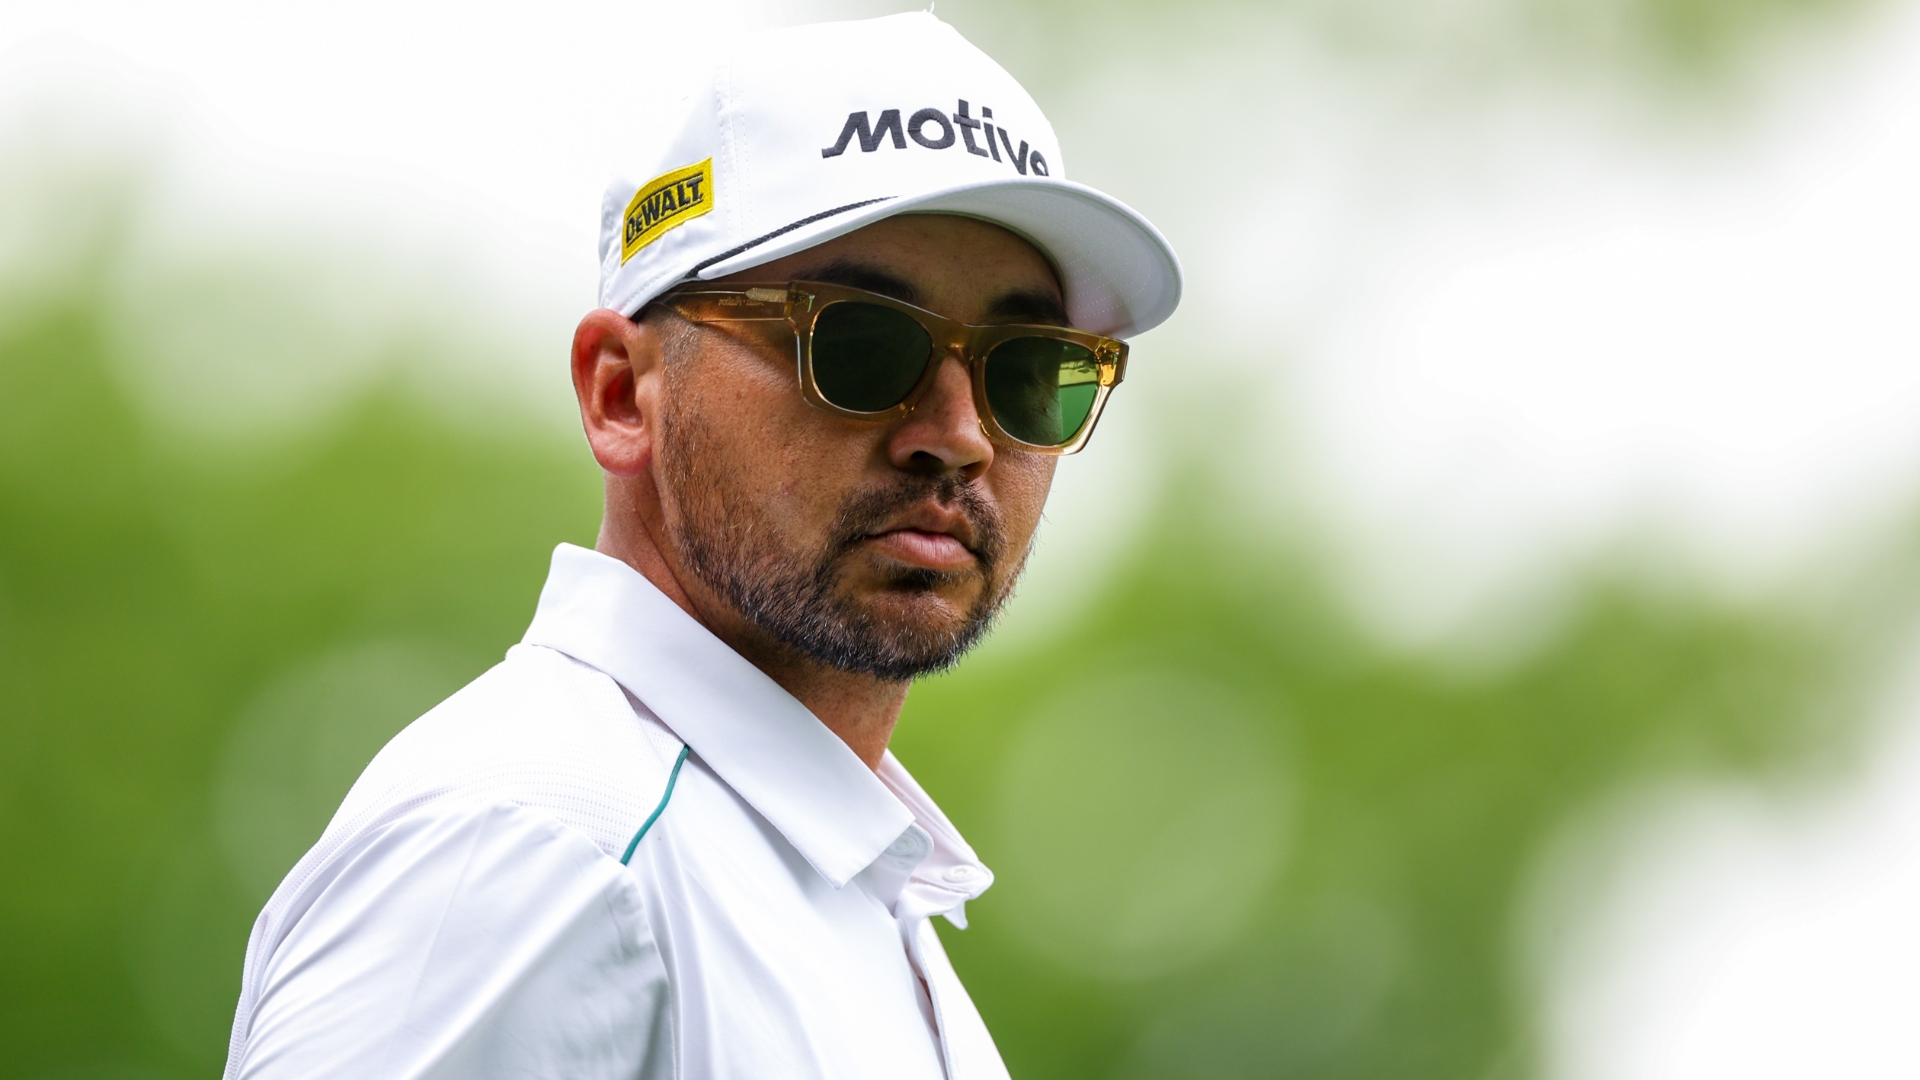 Jason Day chips in for eagle to start his round